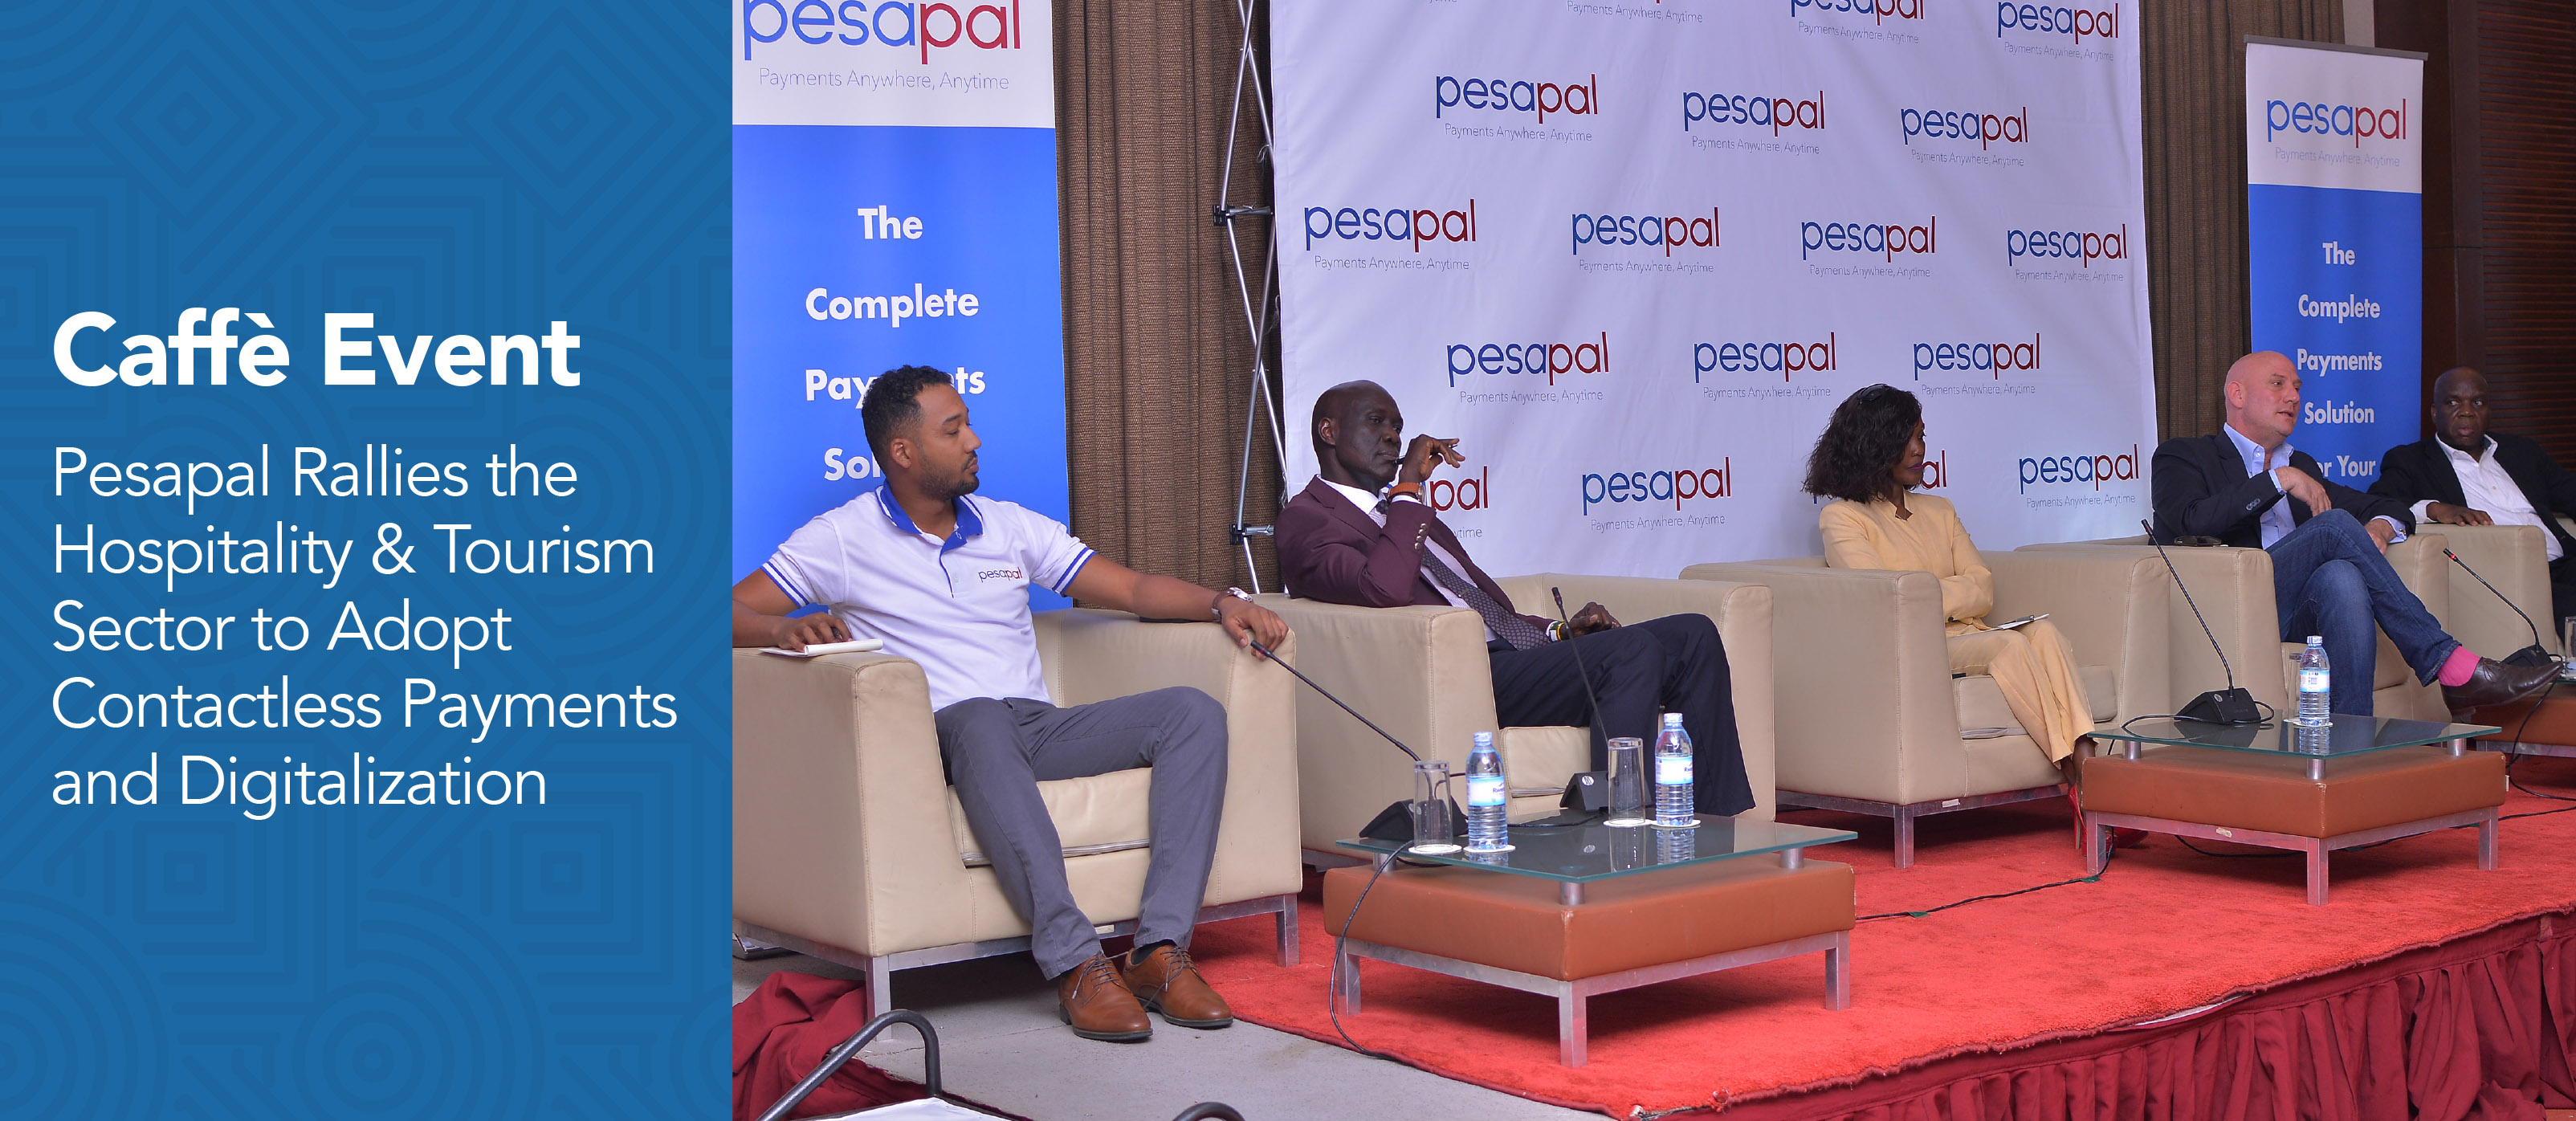 Pesapal Rallies the Hospitality & Tourism Sector to Adopt Contactless Payments and digitalization